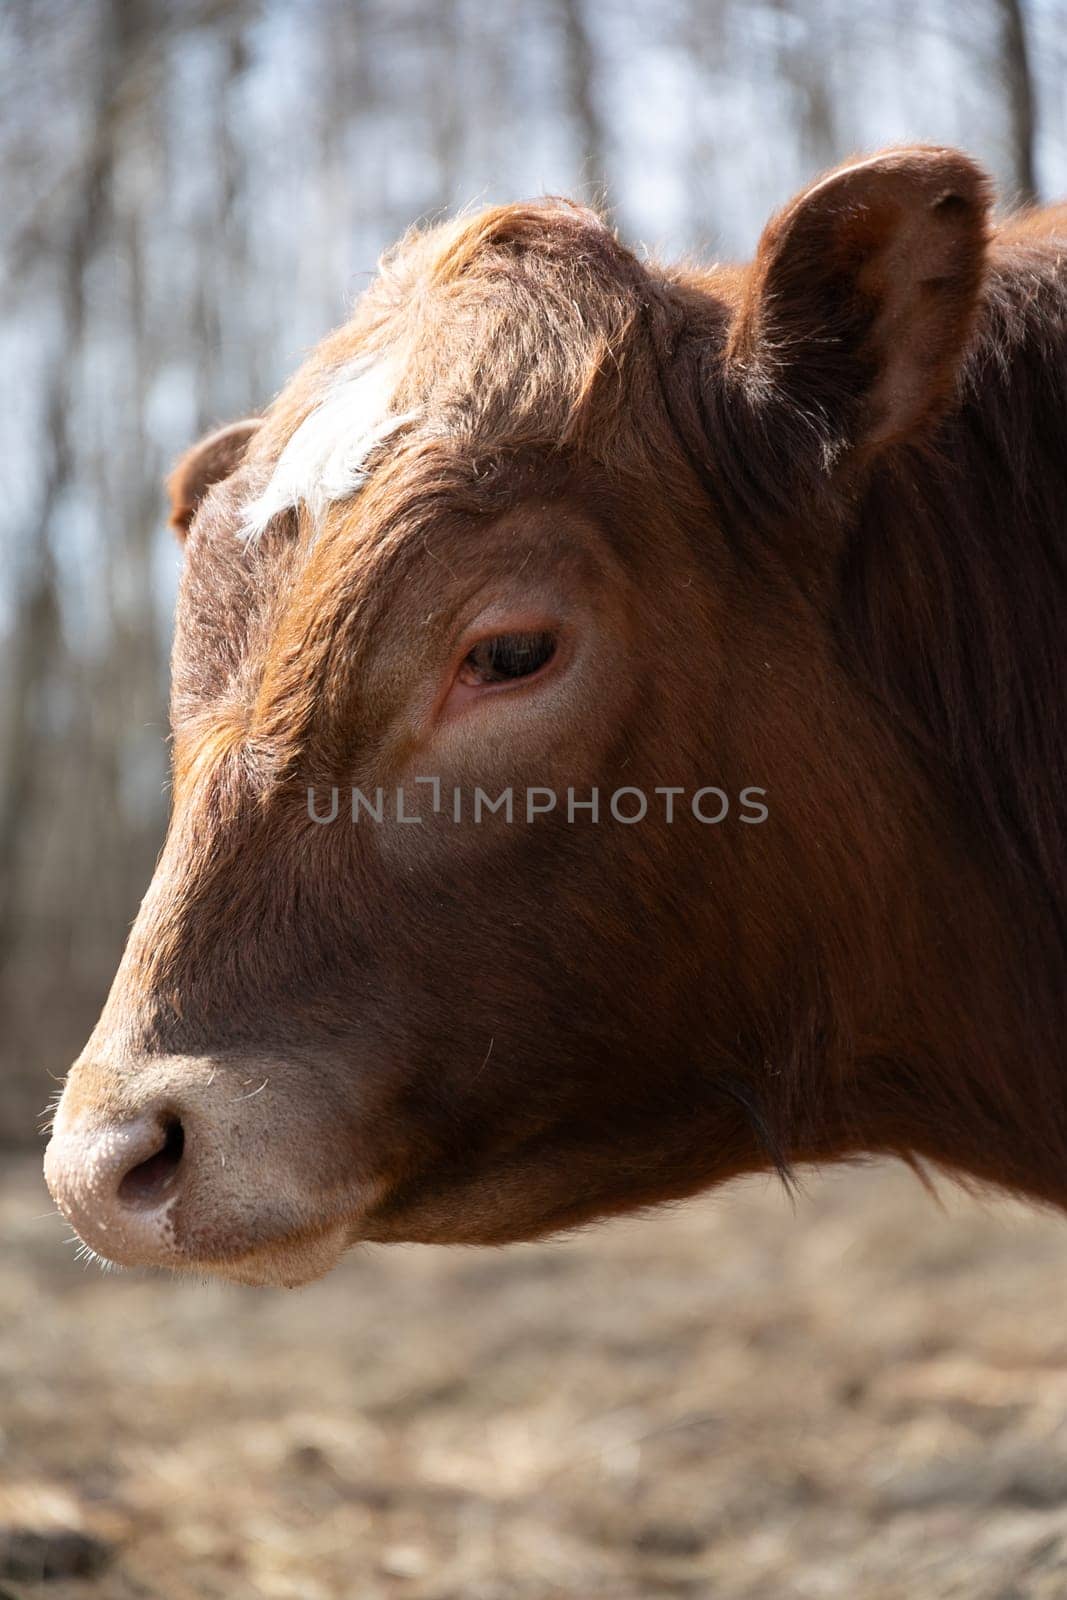 A brown cow standing on top of a dry grass field under the sun. The cow appears calm and peaceful, looking around the vast open space.